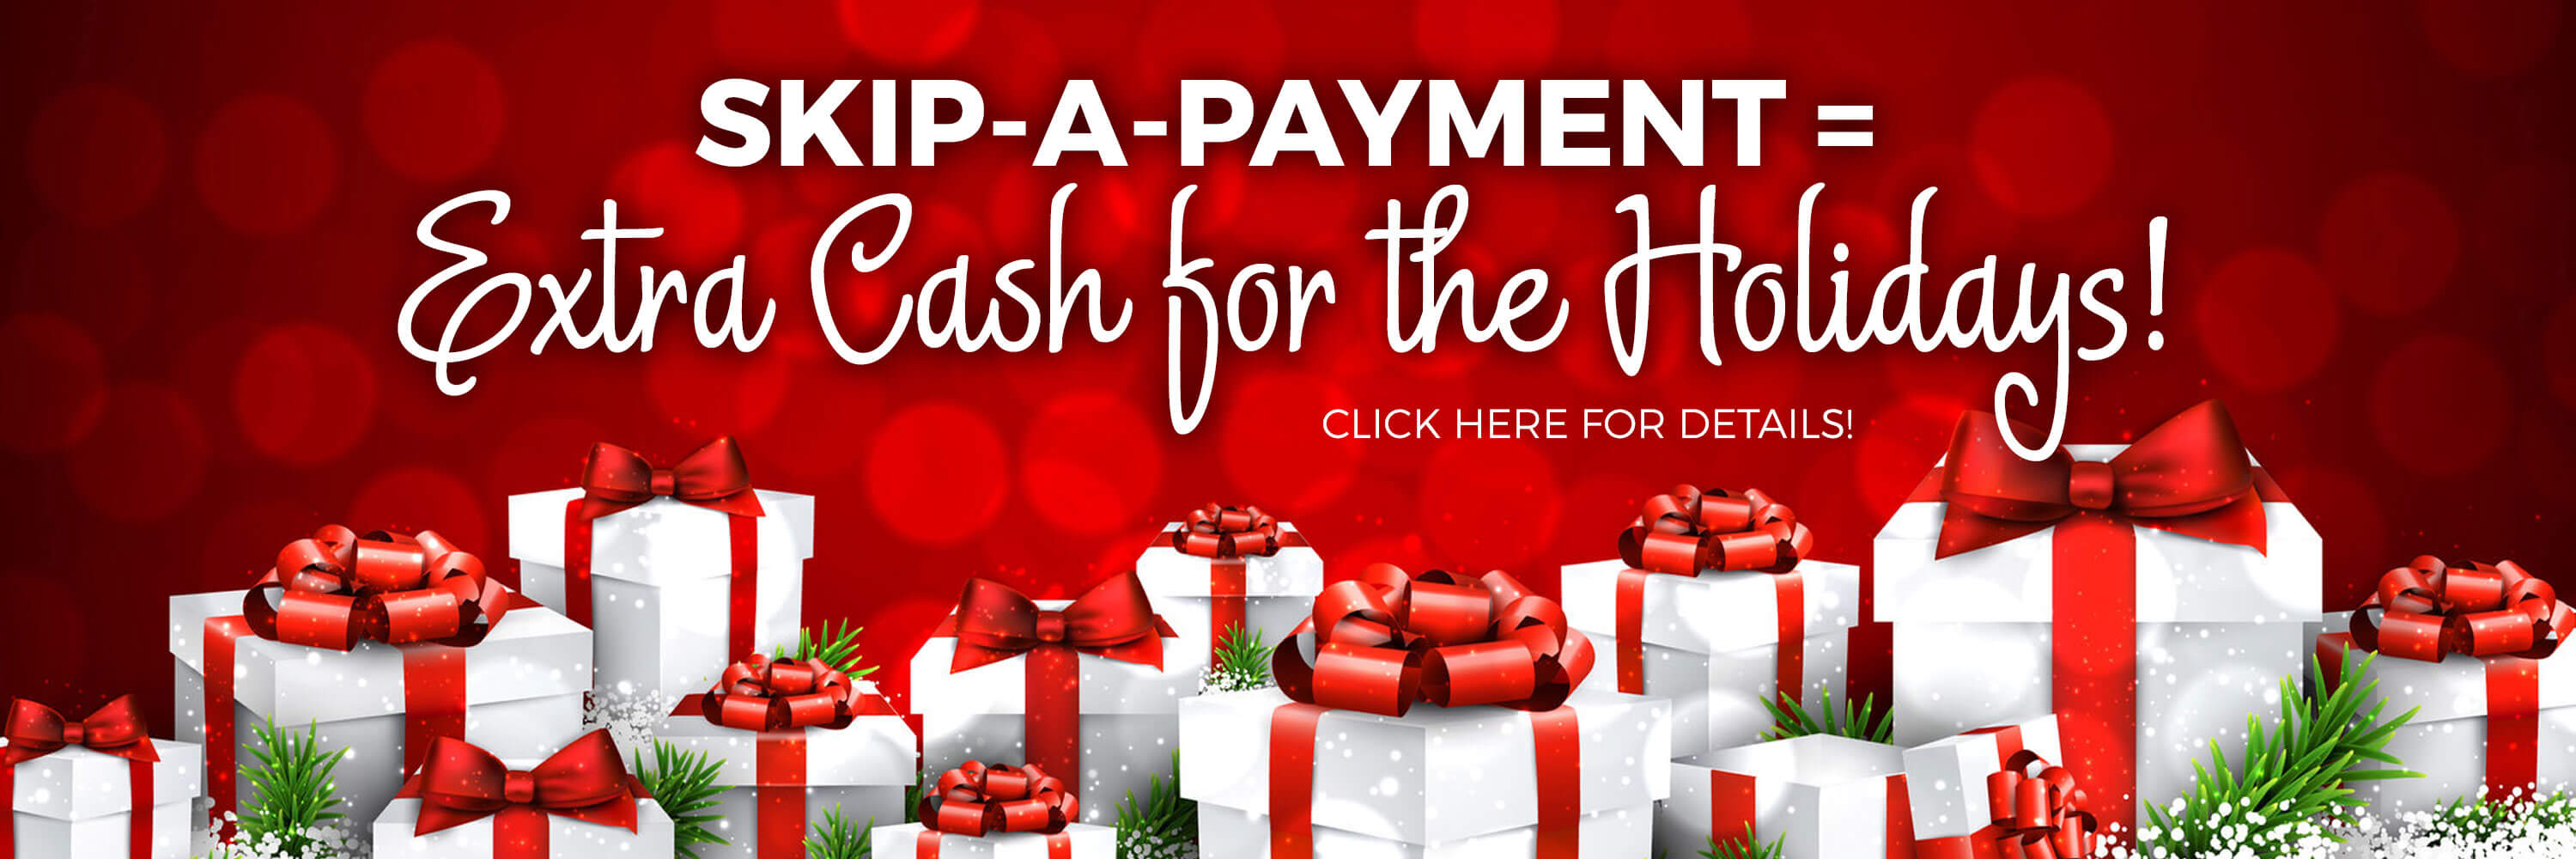 Skip-a-Payment means extra cash for the holidays!